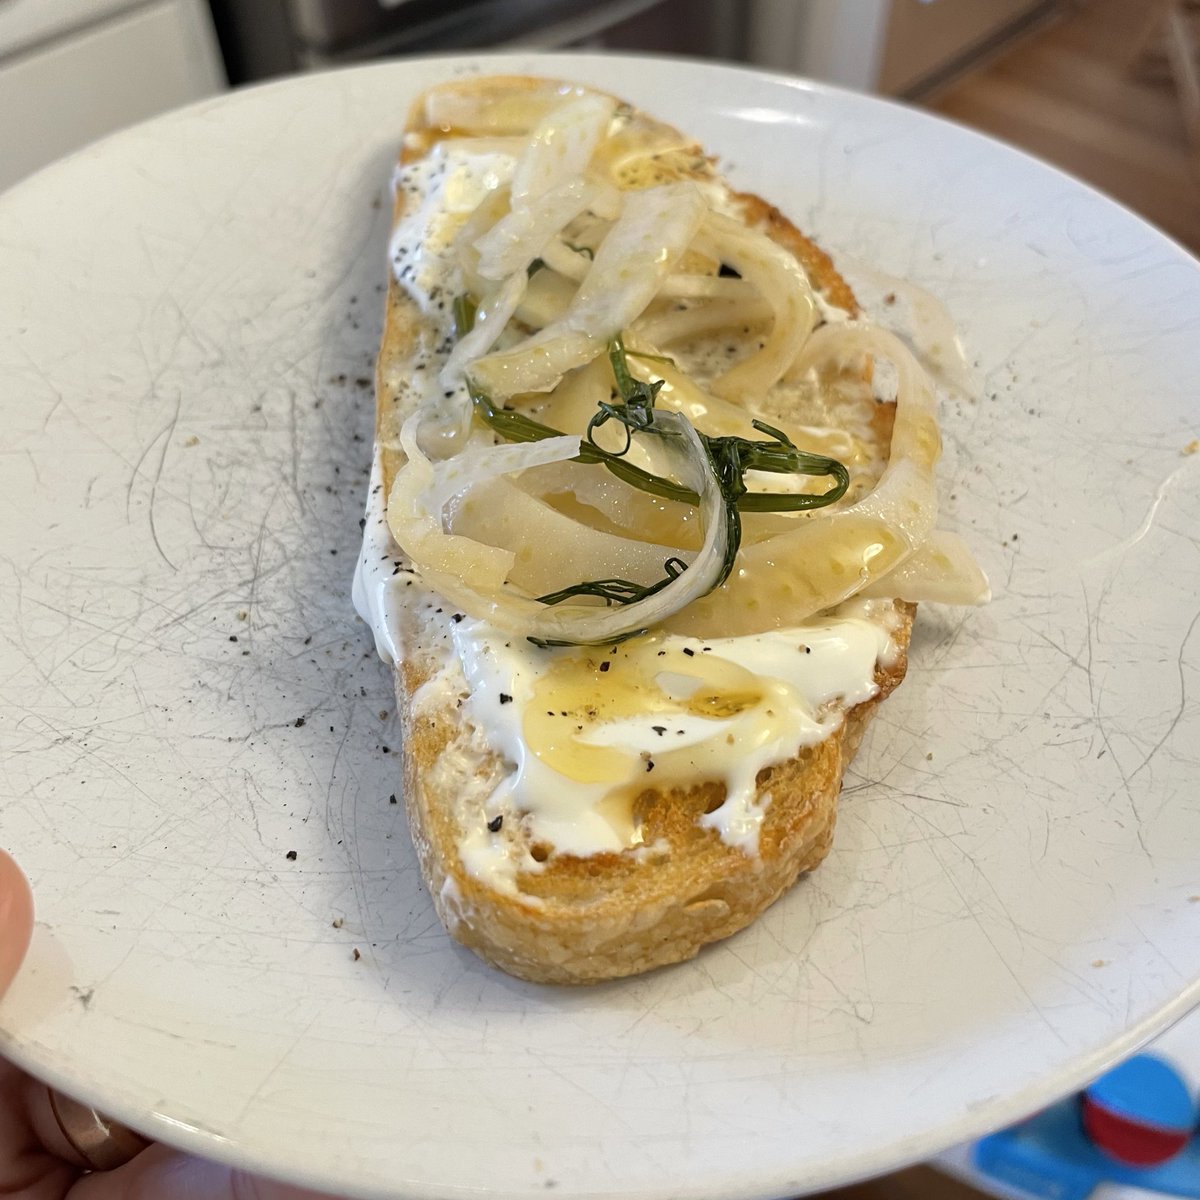 #FancyToast is back with another installment…

sourdough, whipped mascarpone, pickled fennel, honey, cracked pepper, maldon sea salt